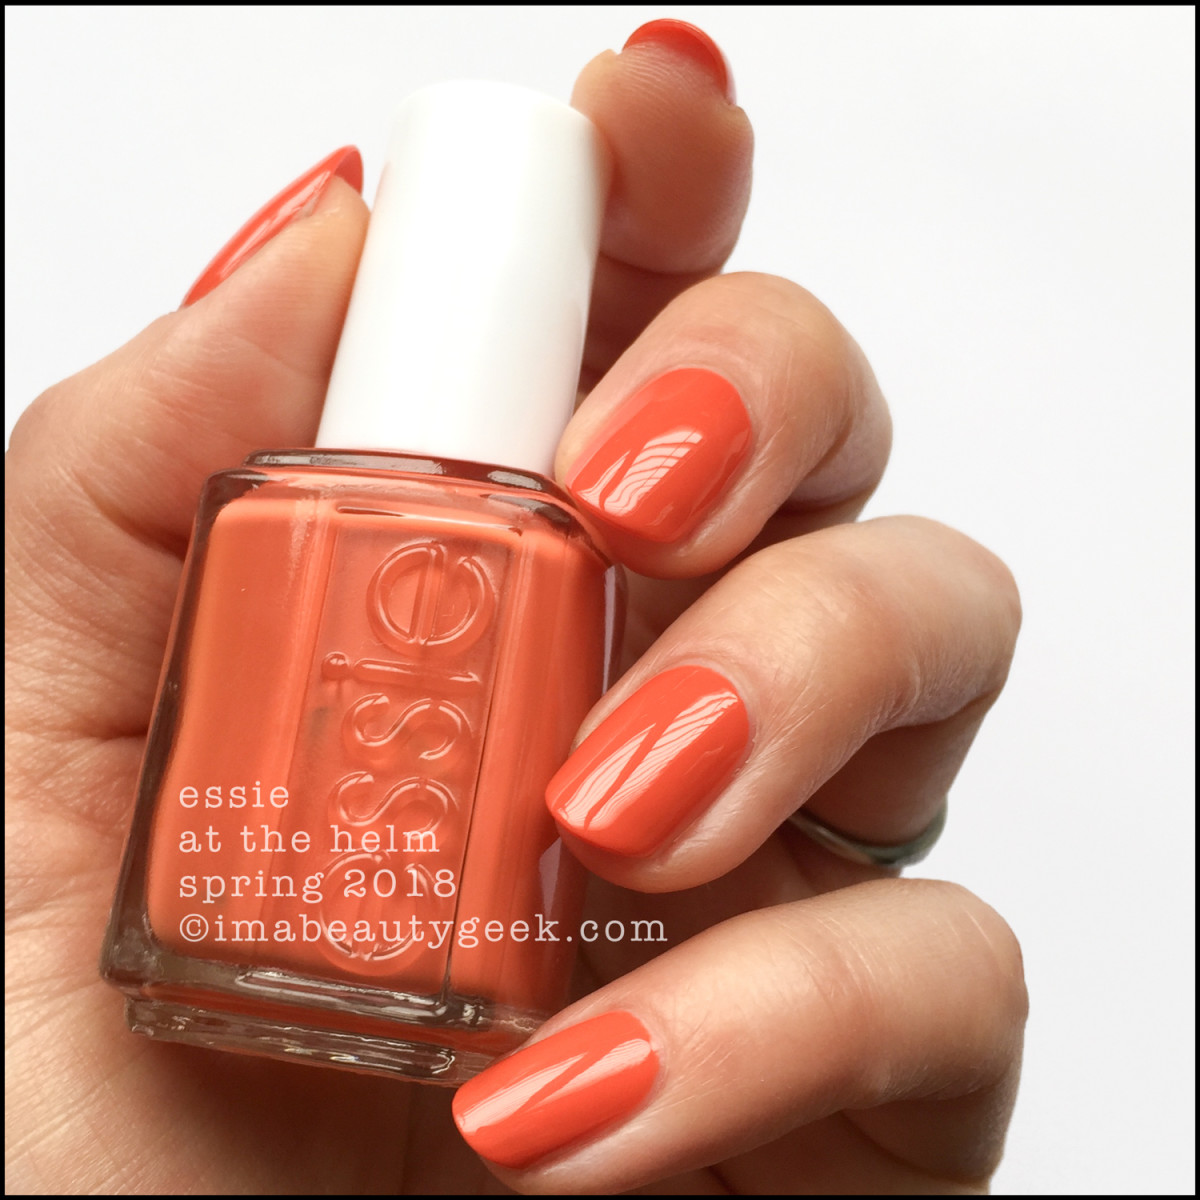 Essie At The Helm - Essie Spring 2018 Collection Swatches Review